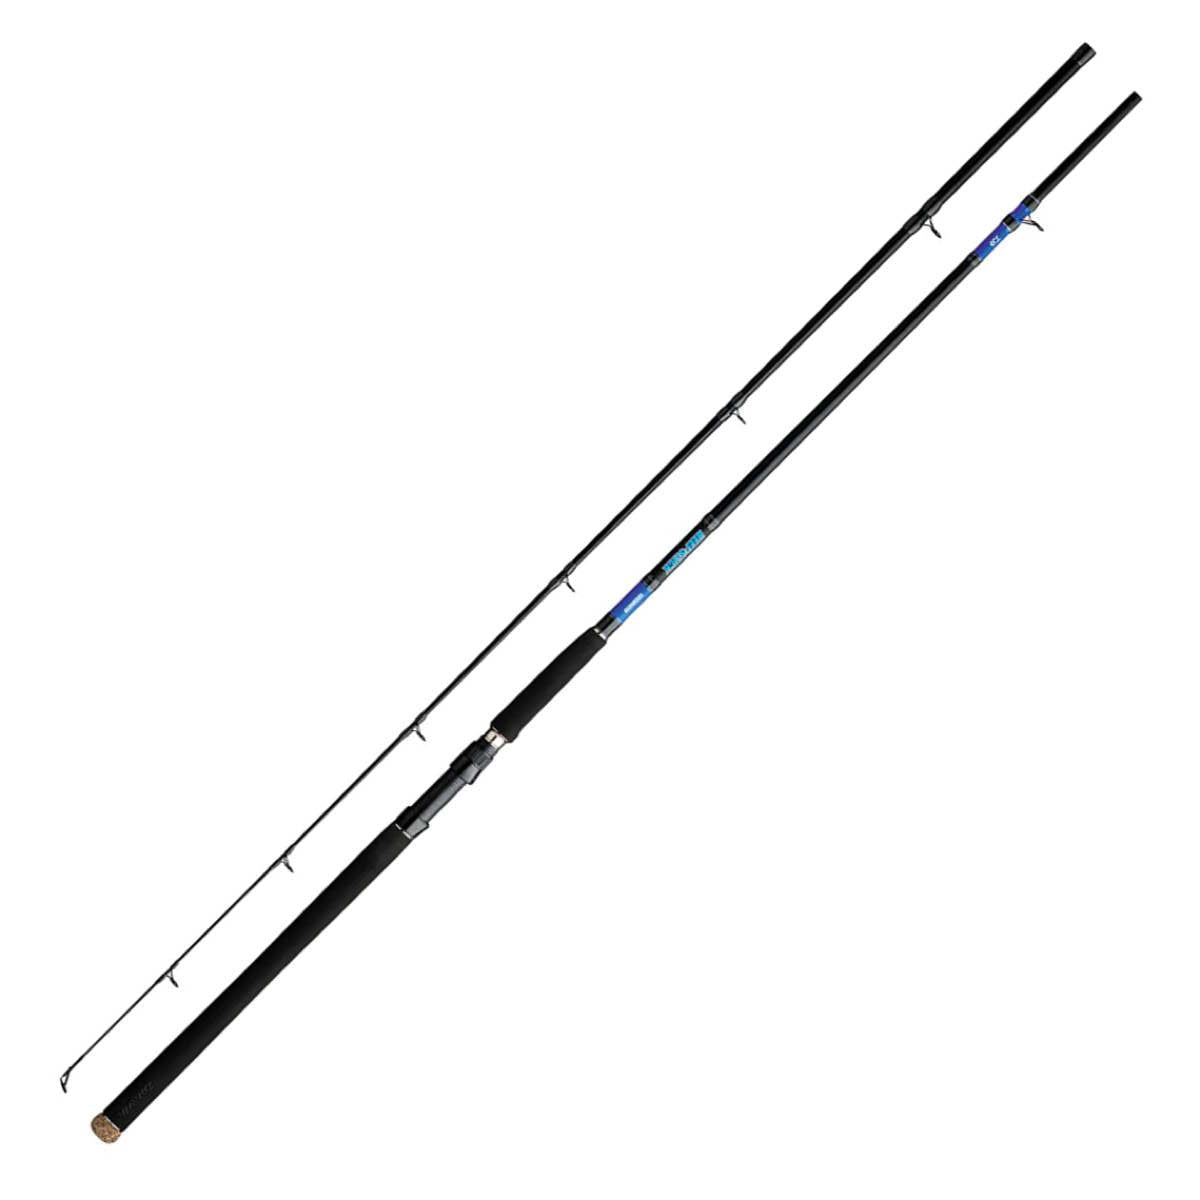 Photo of Daiwa Beefstick Conventional Surf Rod for sale at United Tackle Shops.